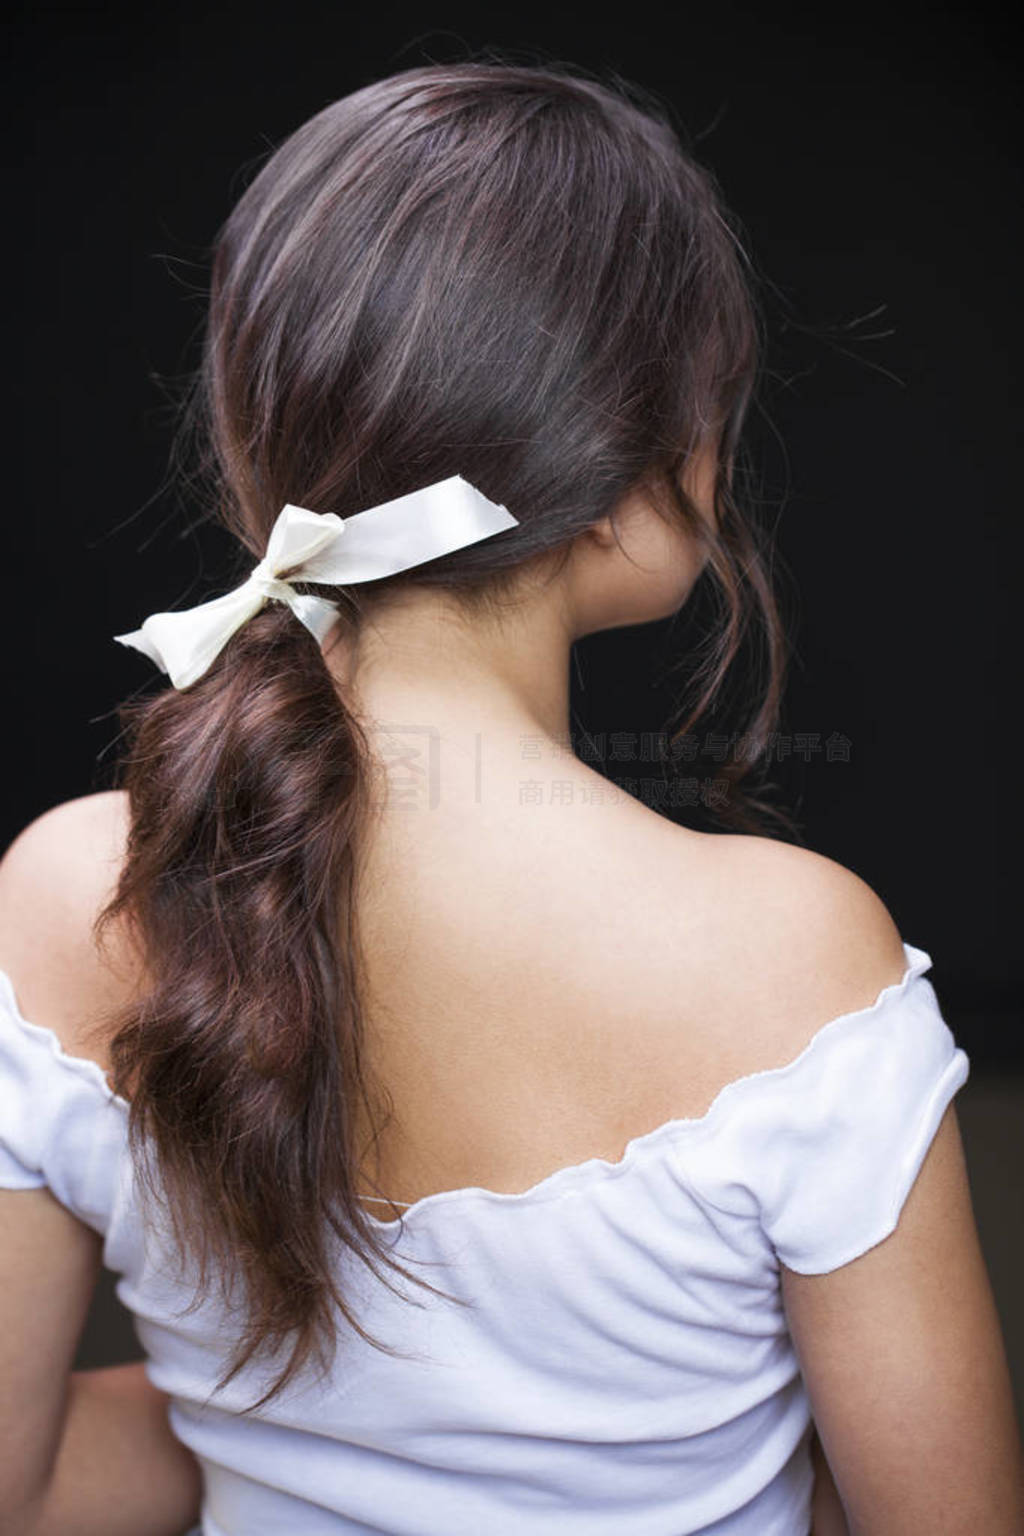 Hair back, young woman with open shoulders